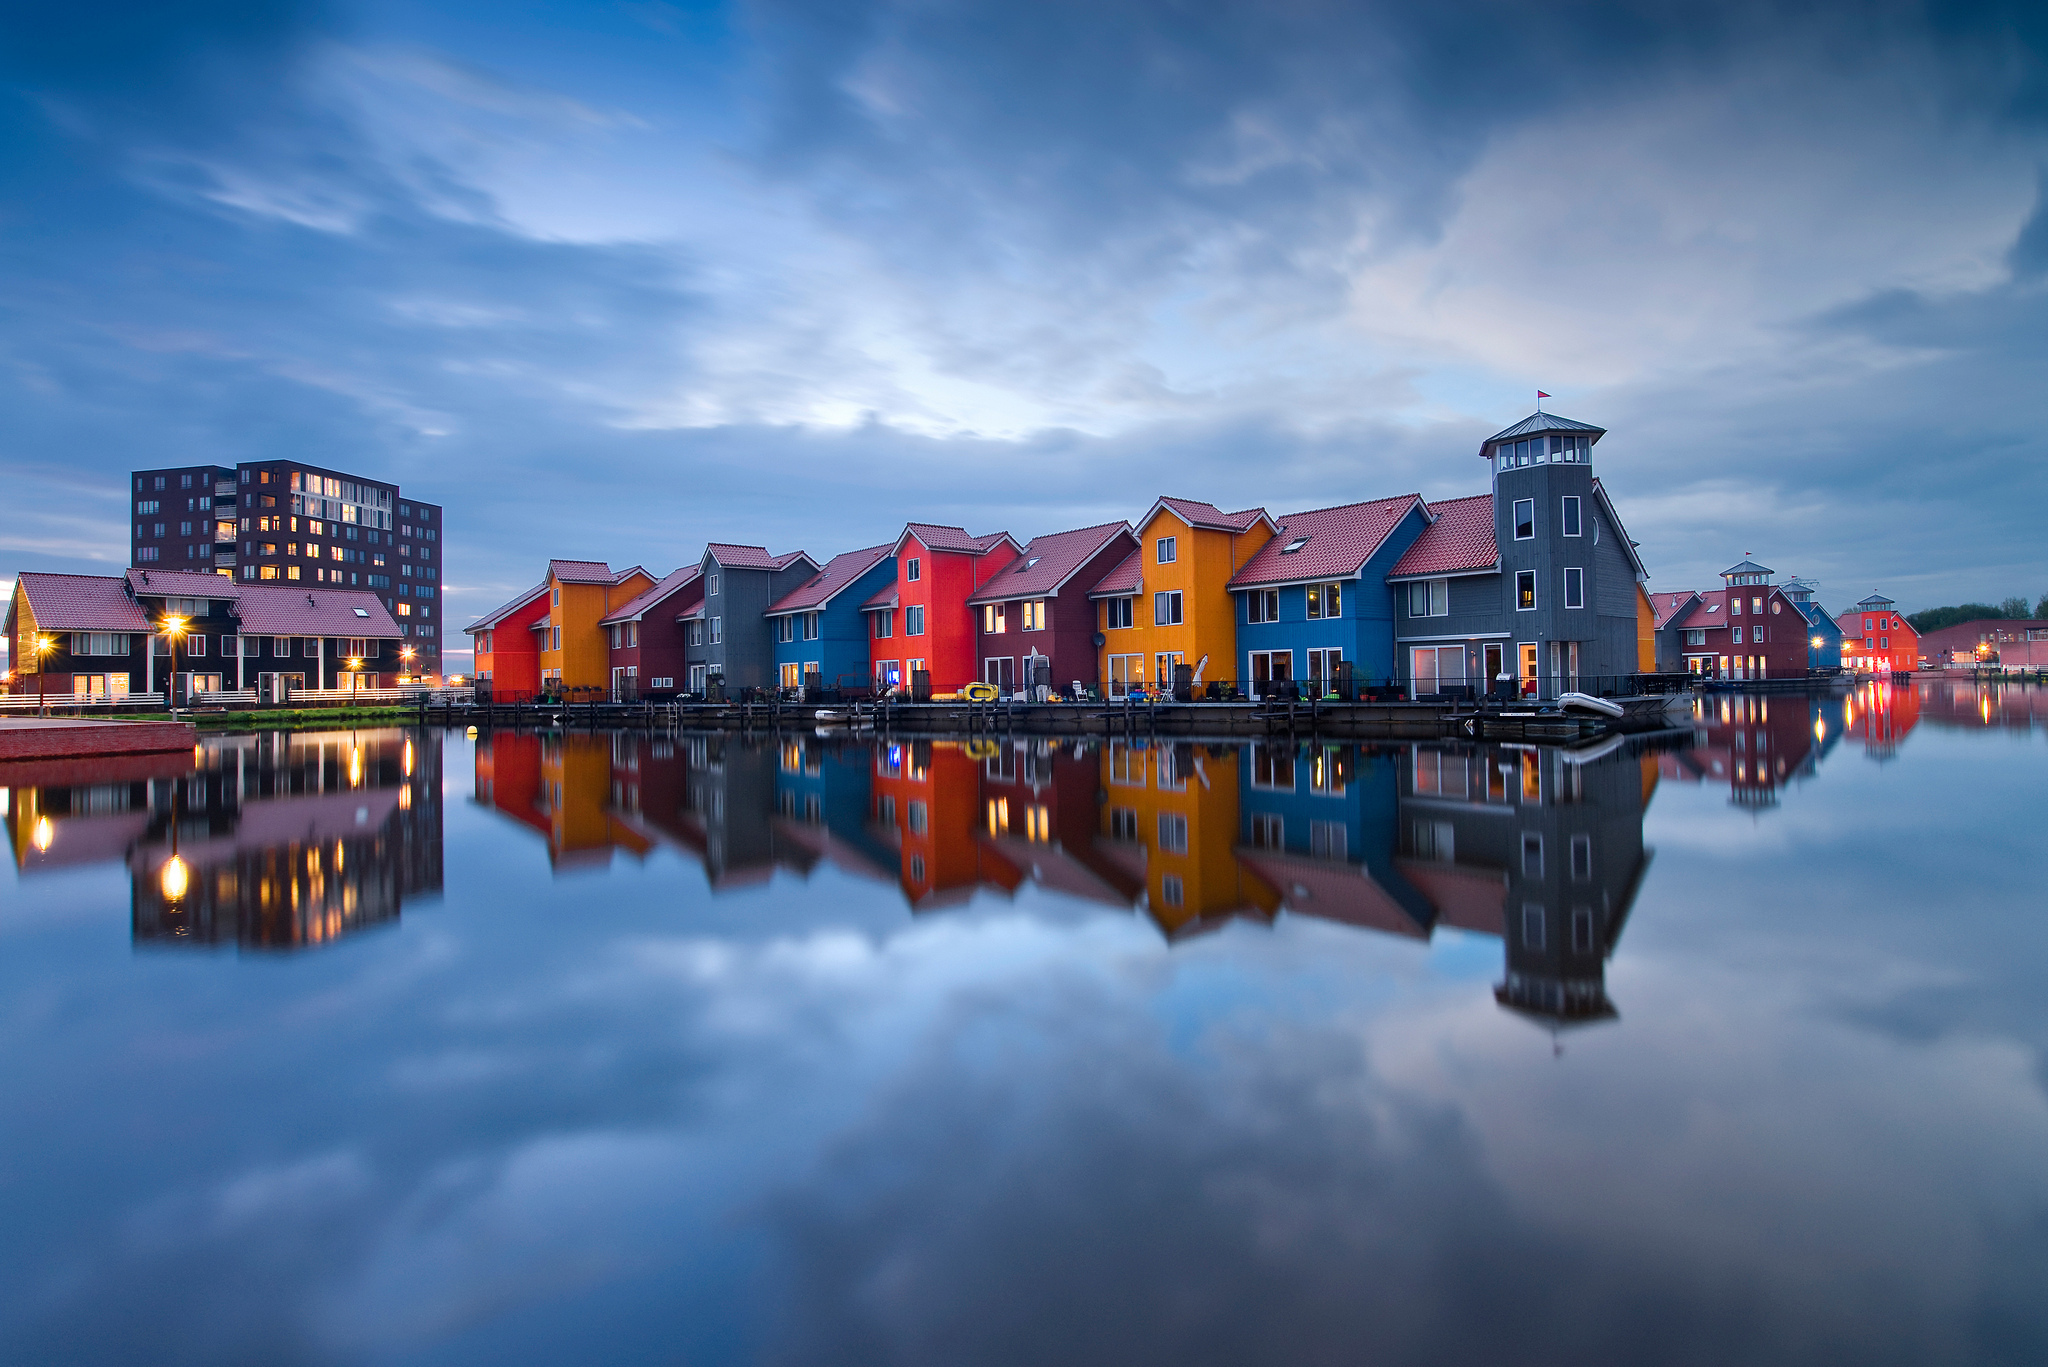 netherlands, man made, town, architecture, groningen, reflection, water, towns